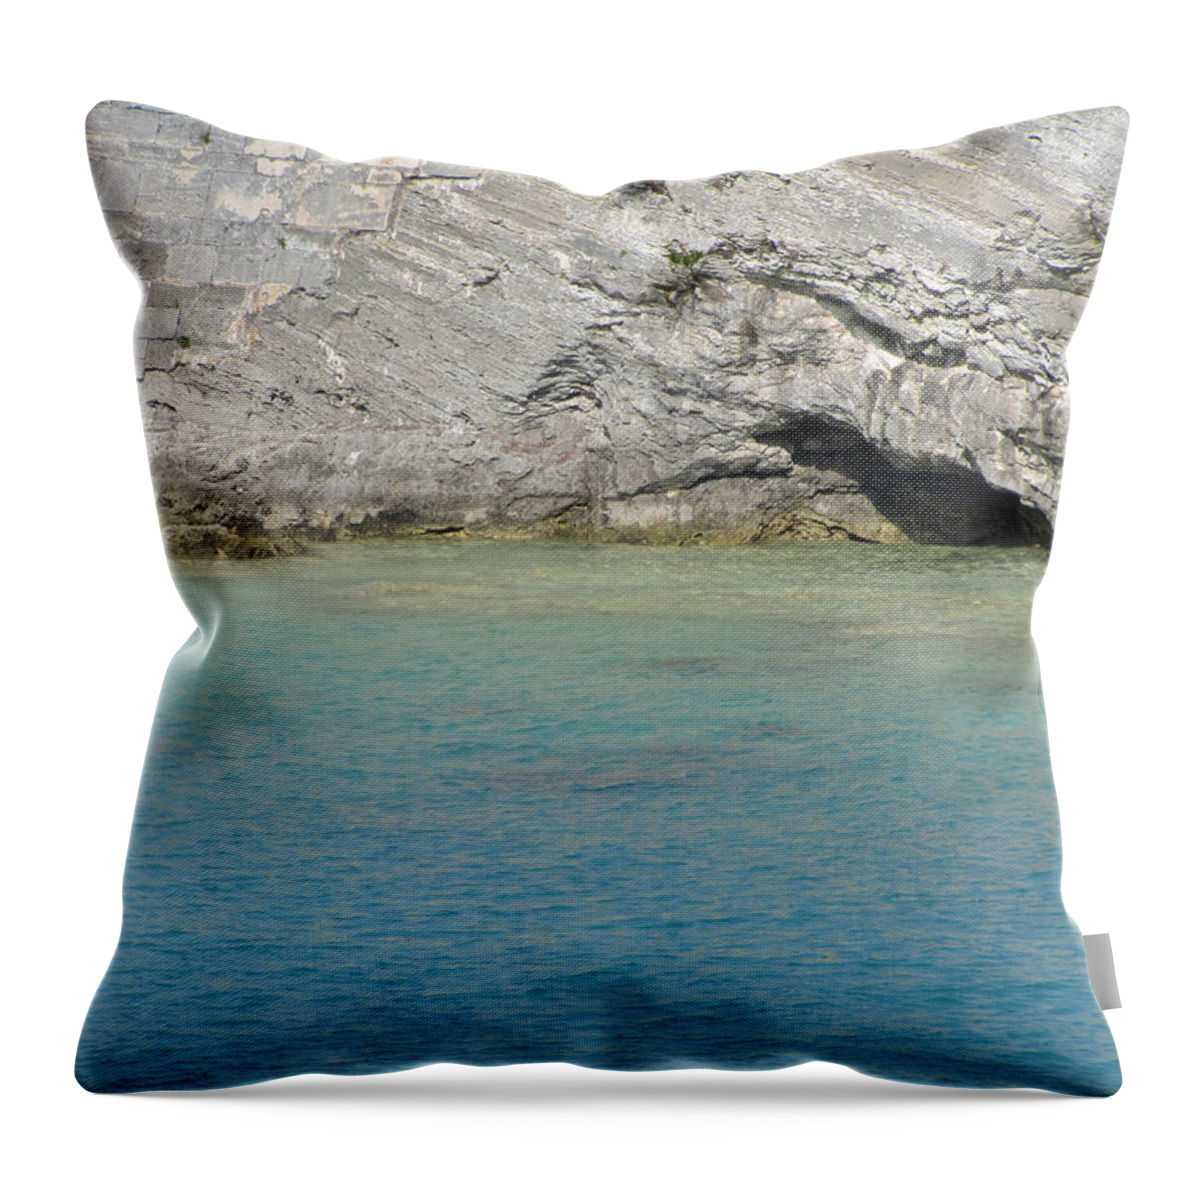 Landscape Throw Pillow featuring the photograph Bermuda Cave by Natalie Rotman Cote